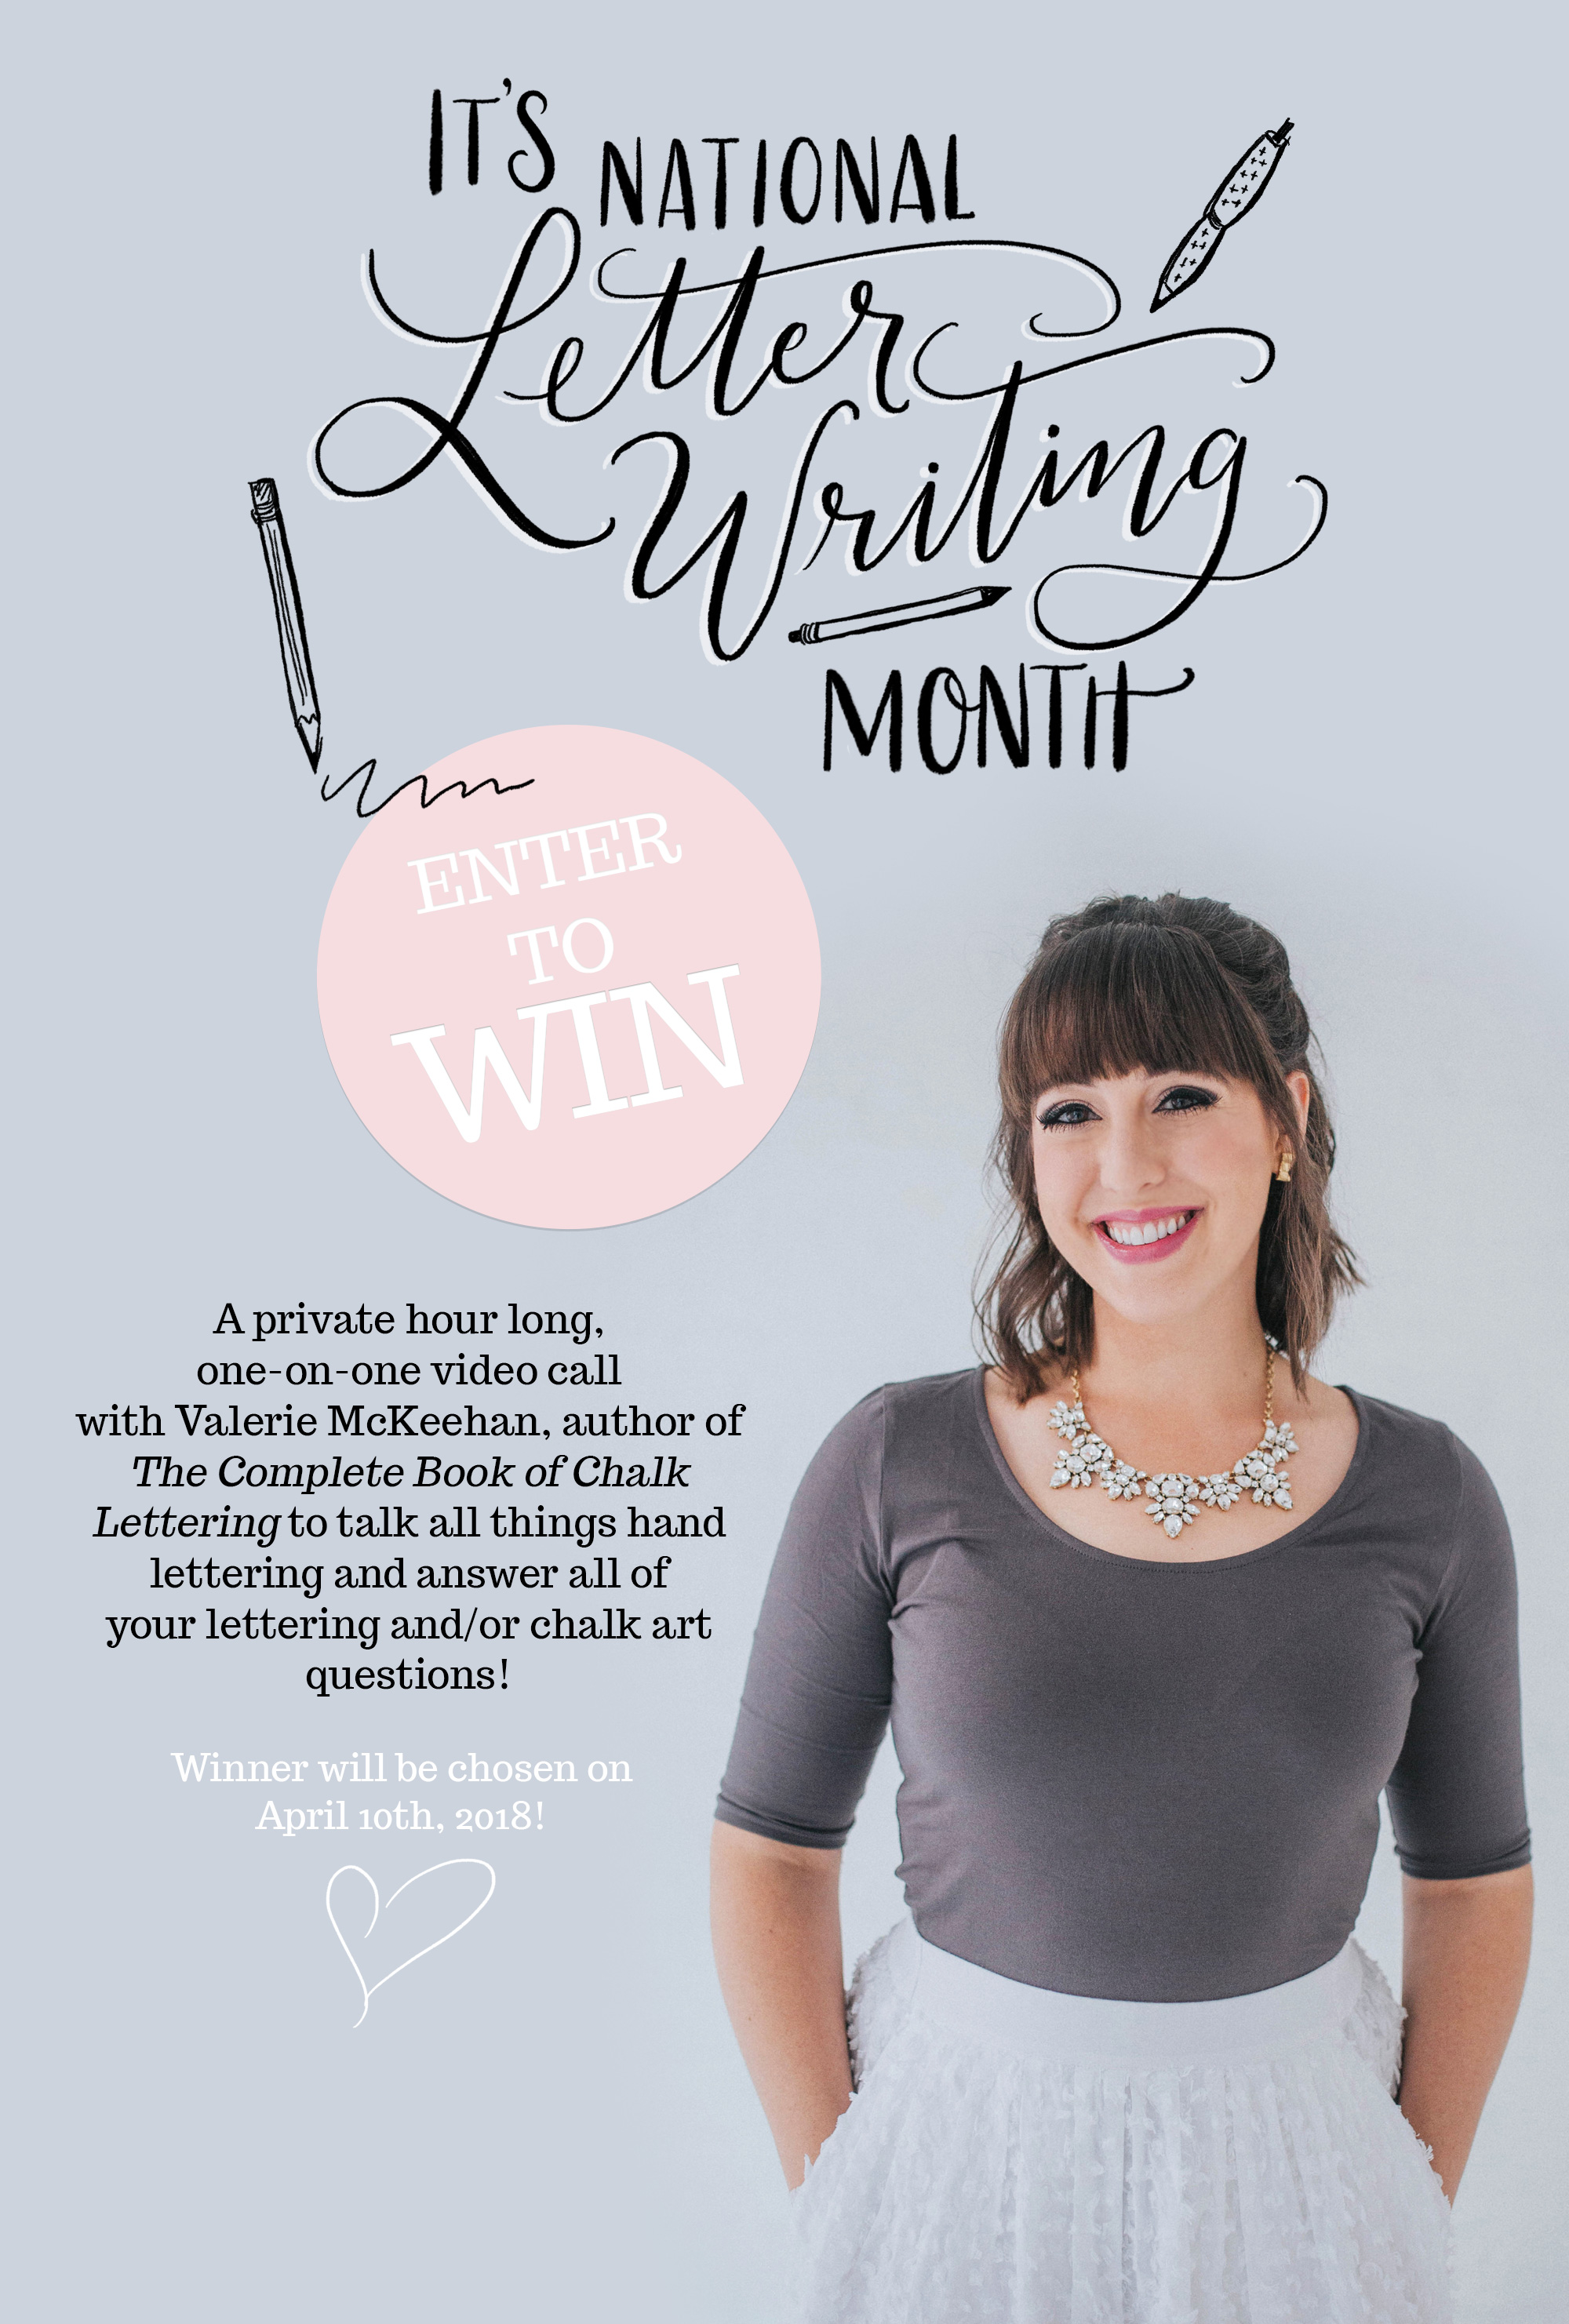 It's National Letter Writing Month - Enter to win a private call with Valerie McKeehan